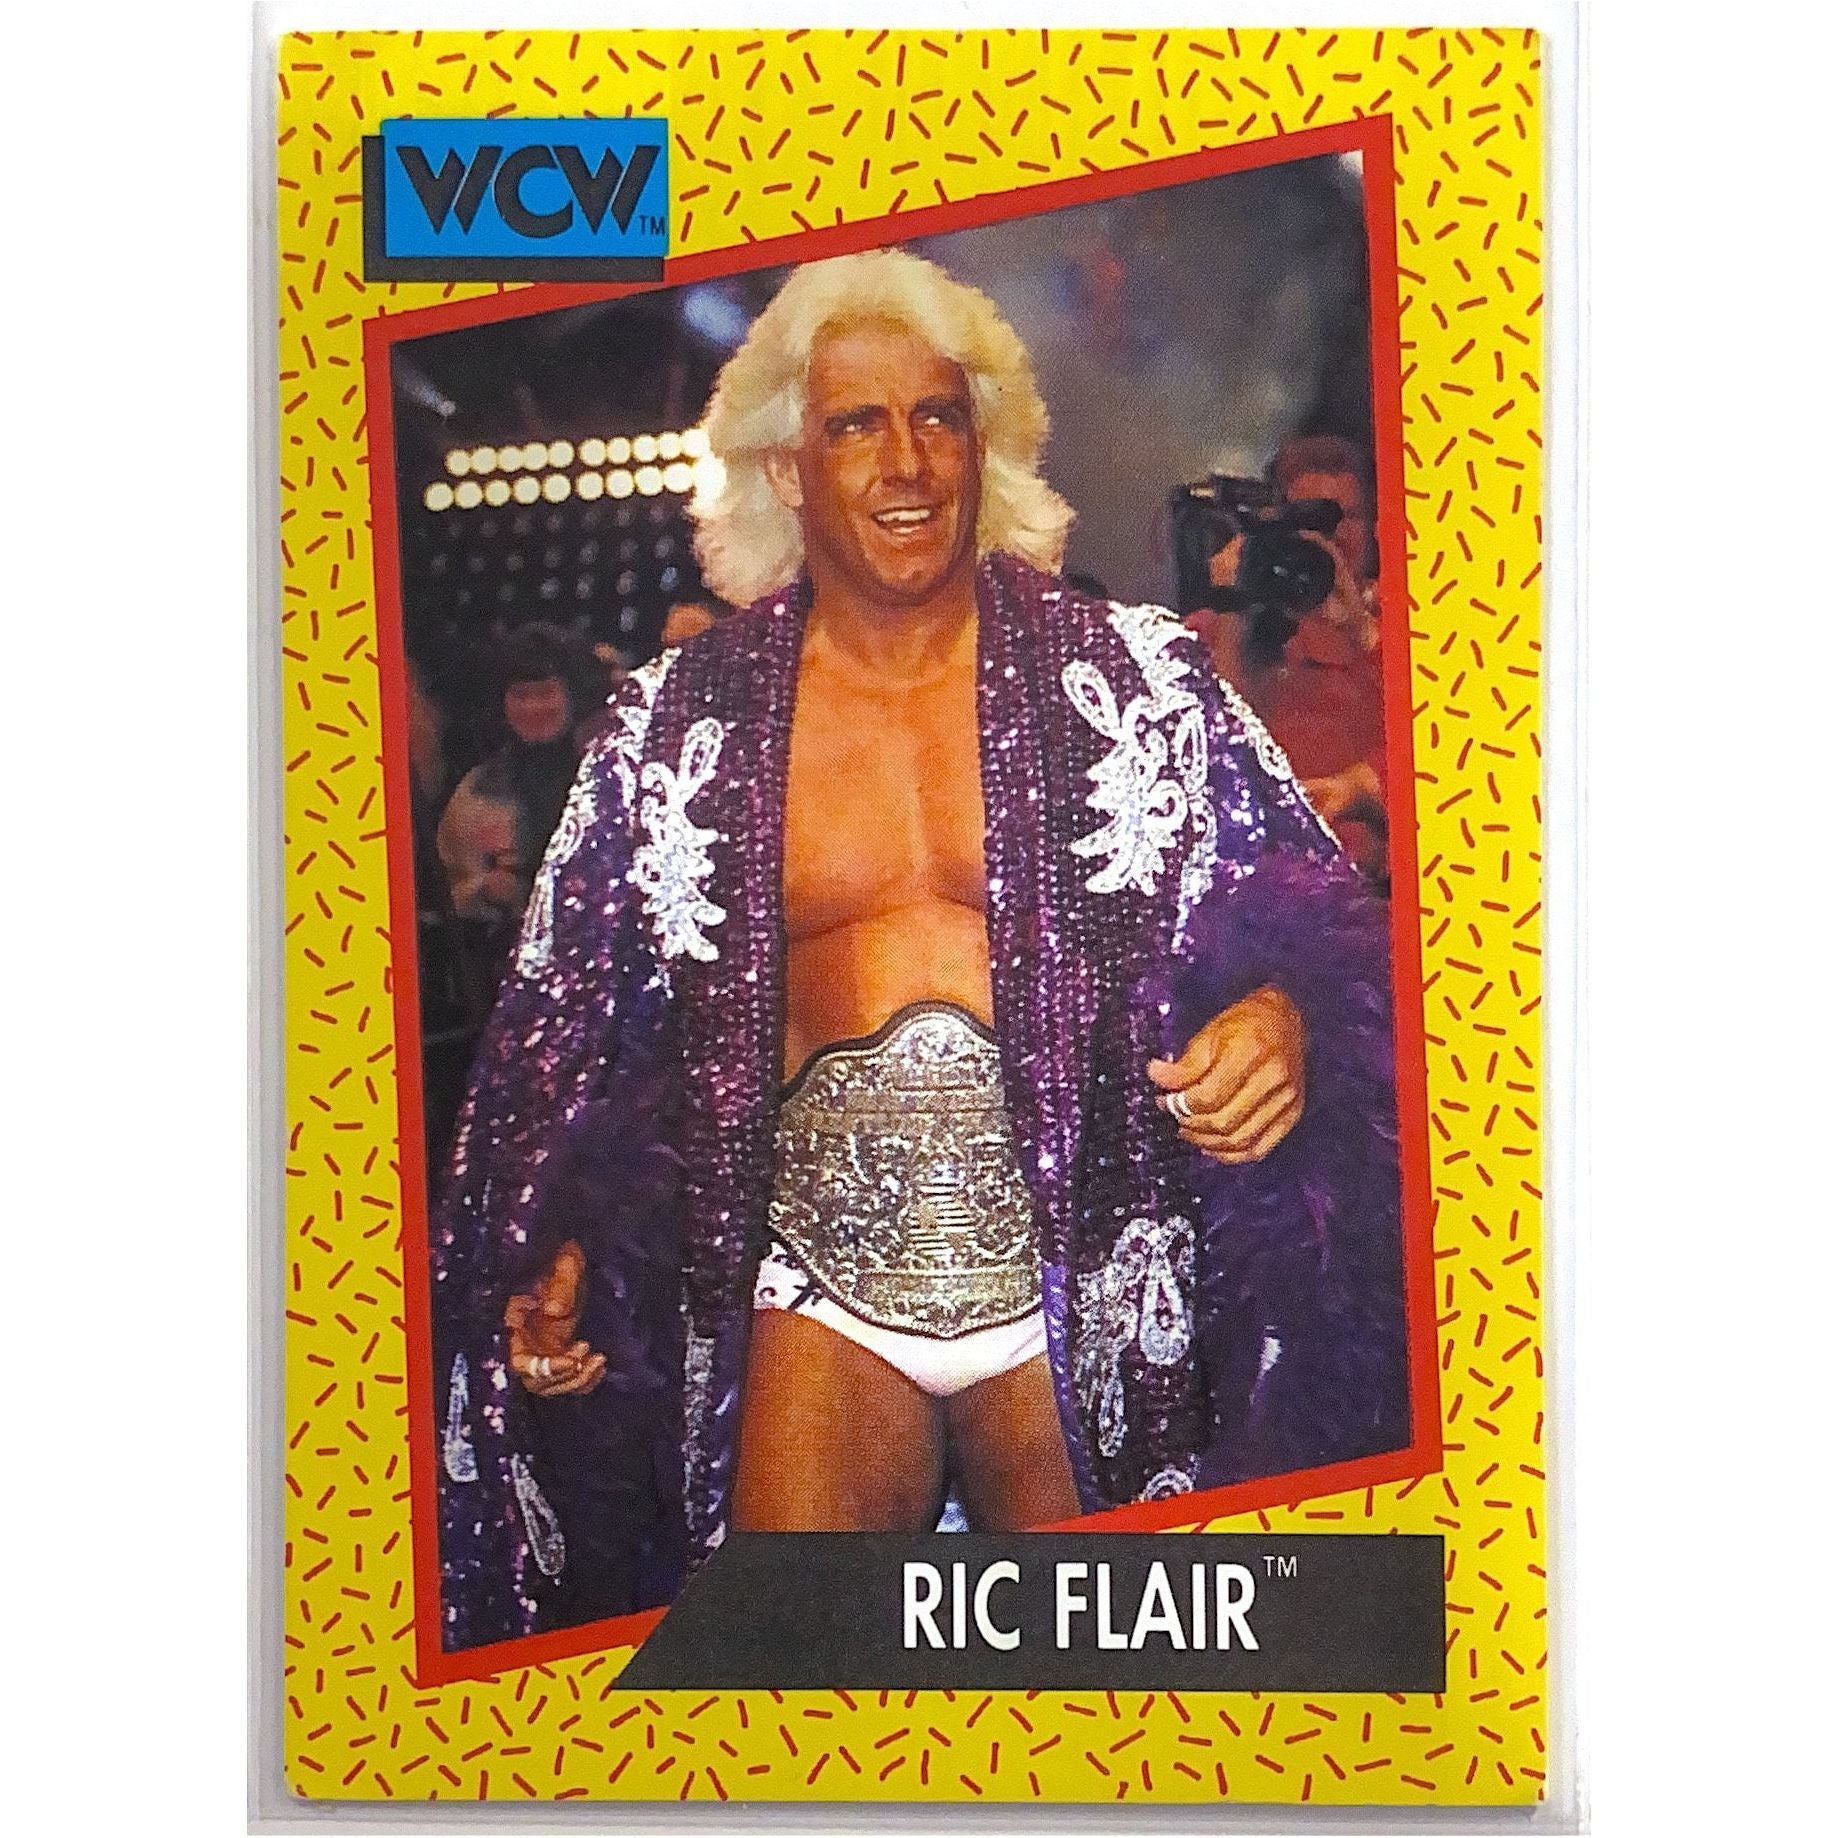  1991 Turner Entertainment Ric Flair Impel WCW #44  Local Legends Cards & Collectibles